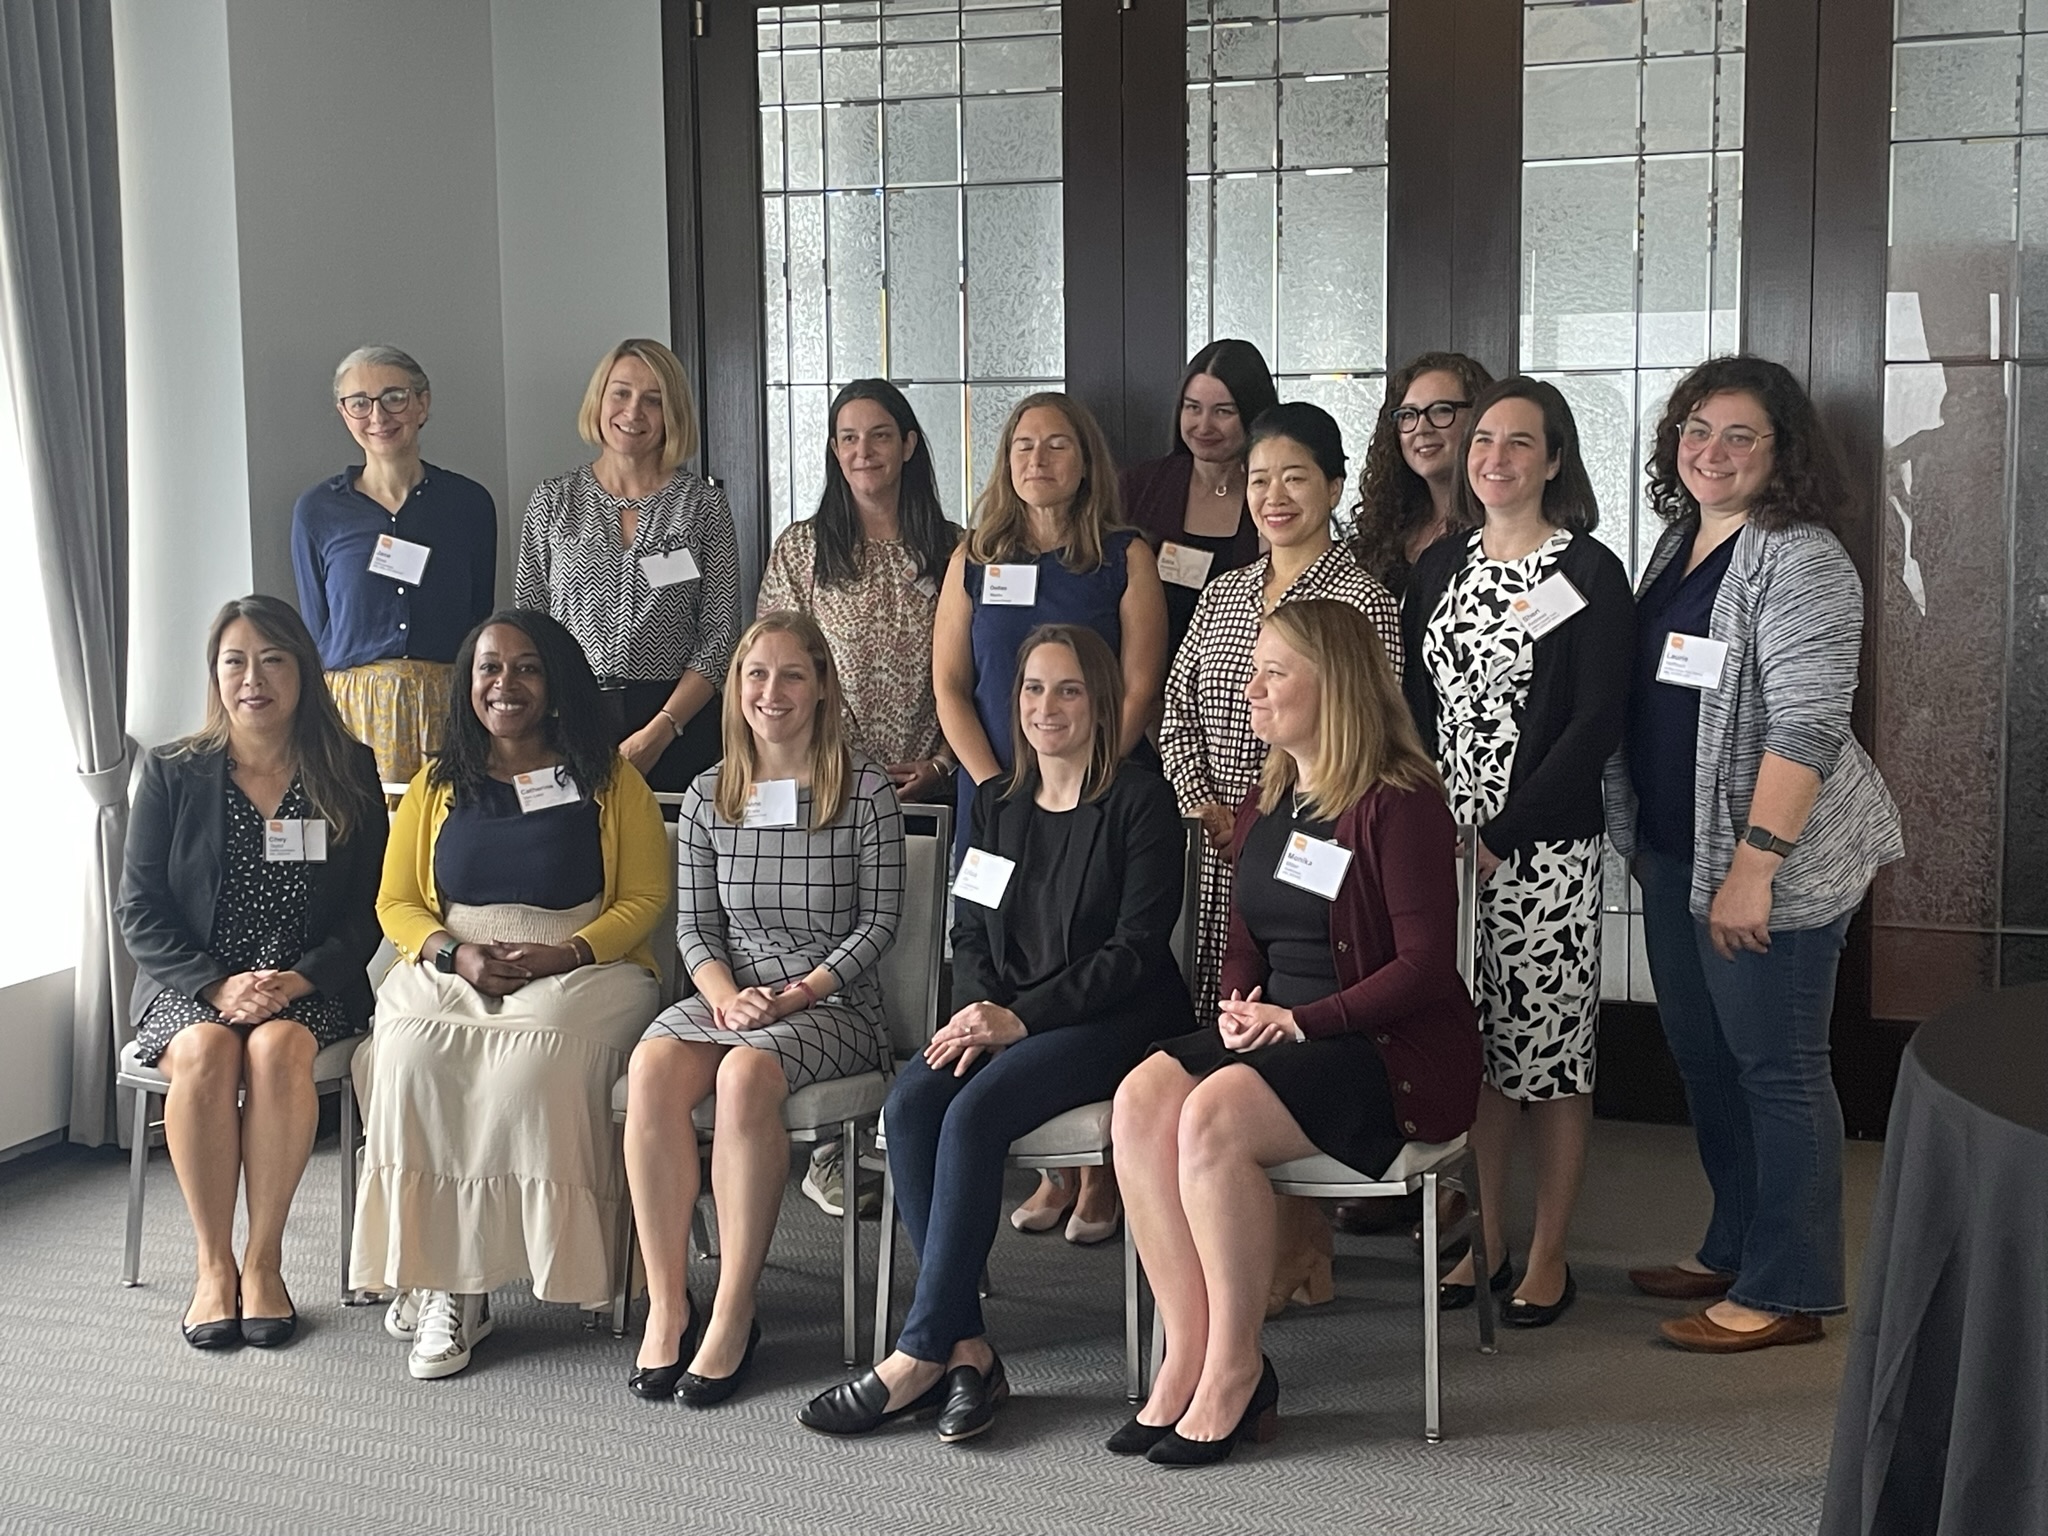 /Chicago%20Women%20in%20Architecture%20Foundation%20%28CWAF%29%20inaugural%20Ladders%20to%20Leadership%20Program%20graduates